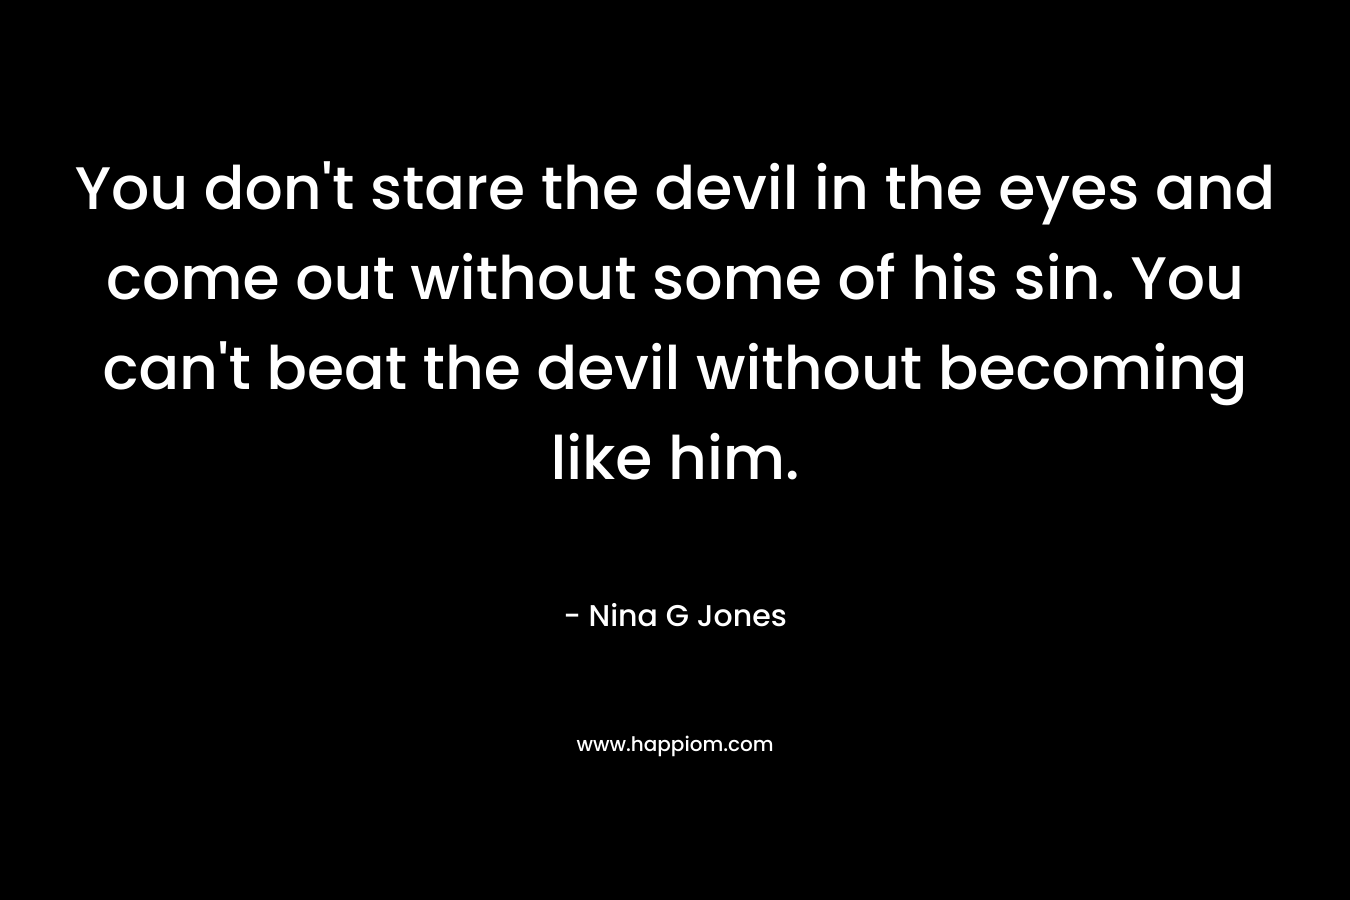 You don’t stare the devil in the eyes and come out without some of his sin. You can’t beat the devil without becoming like him. – Nina G Jones